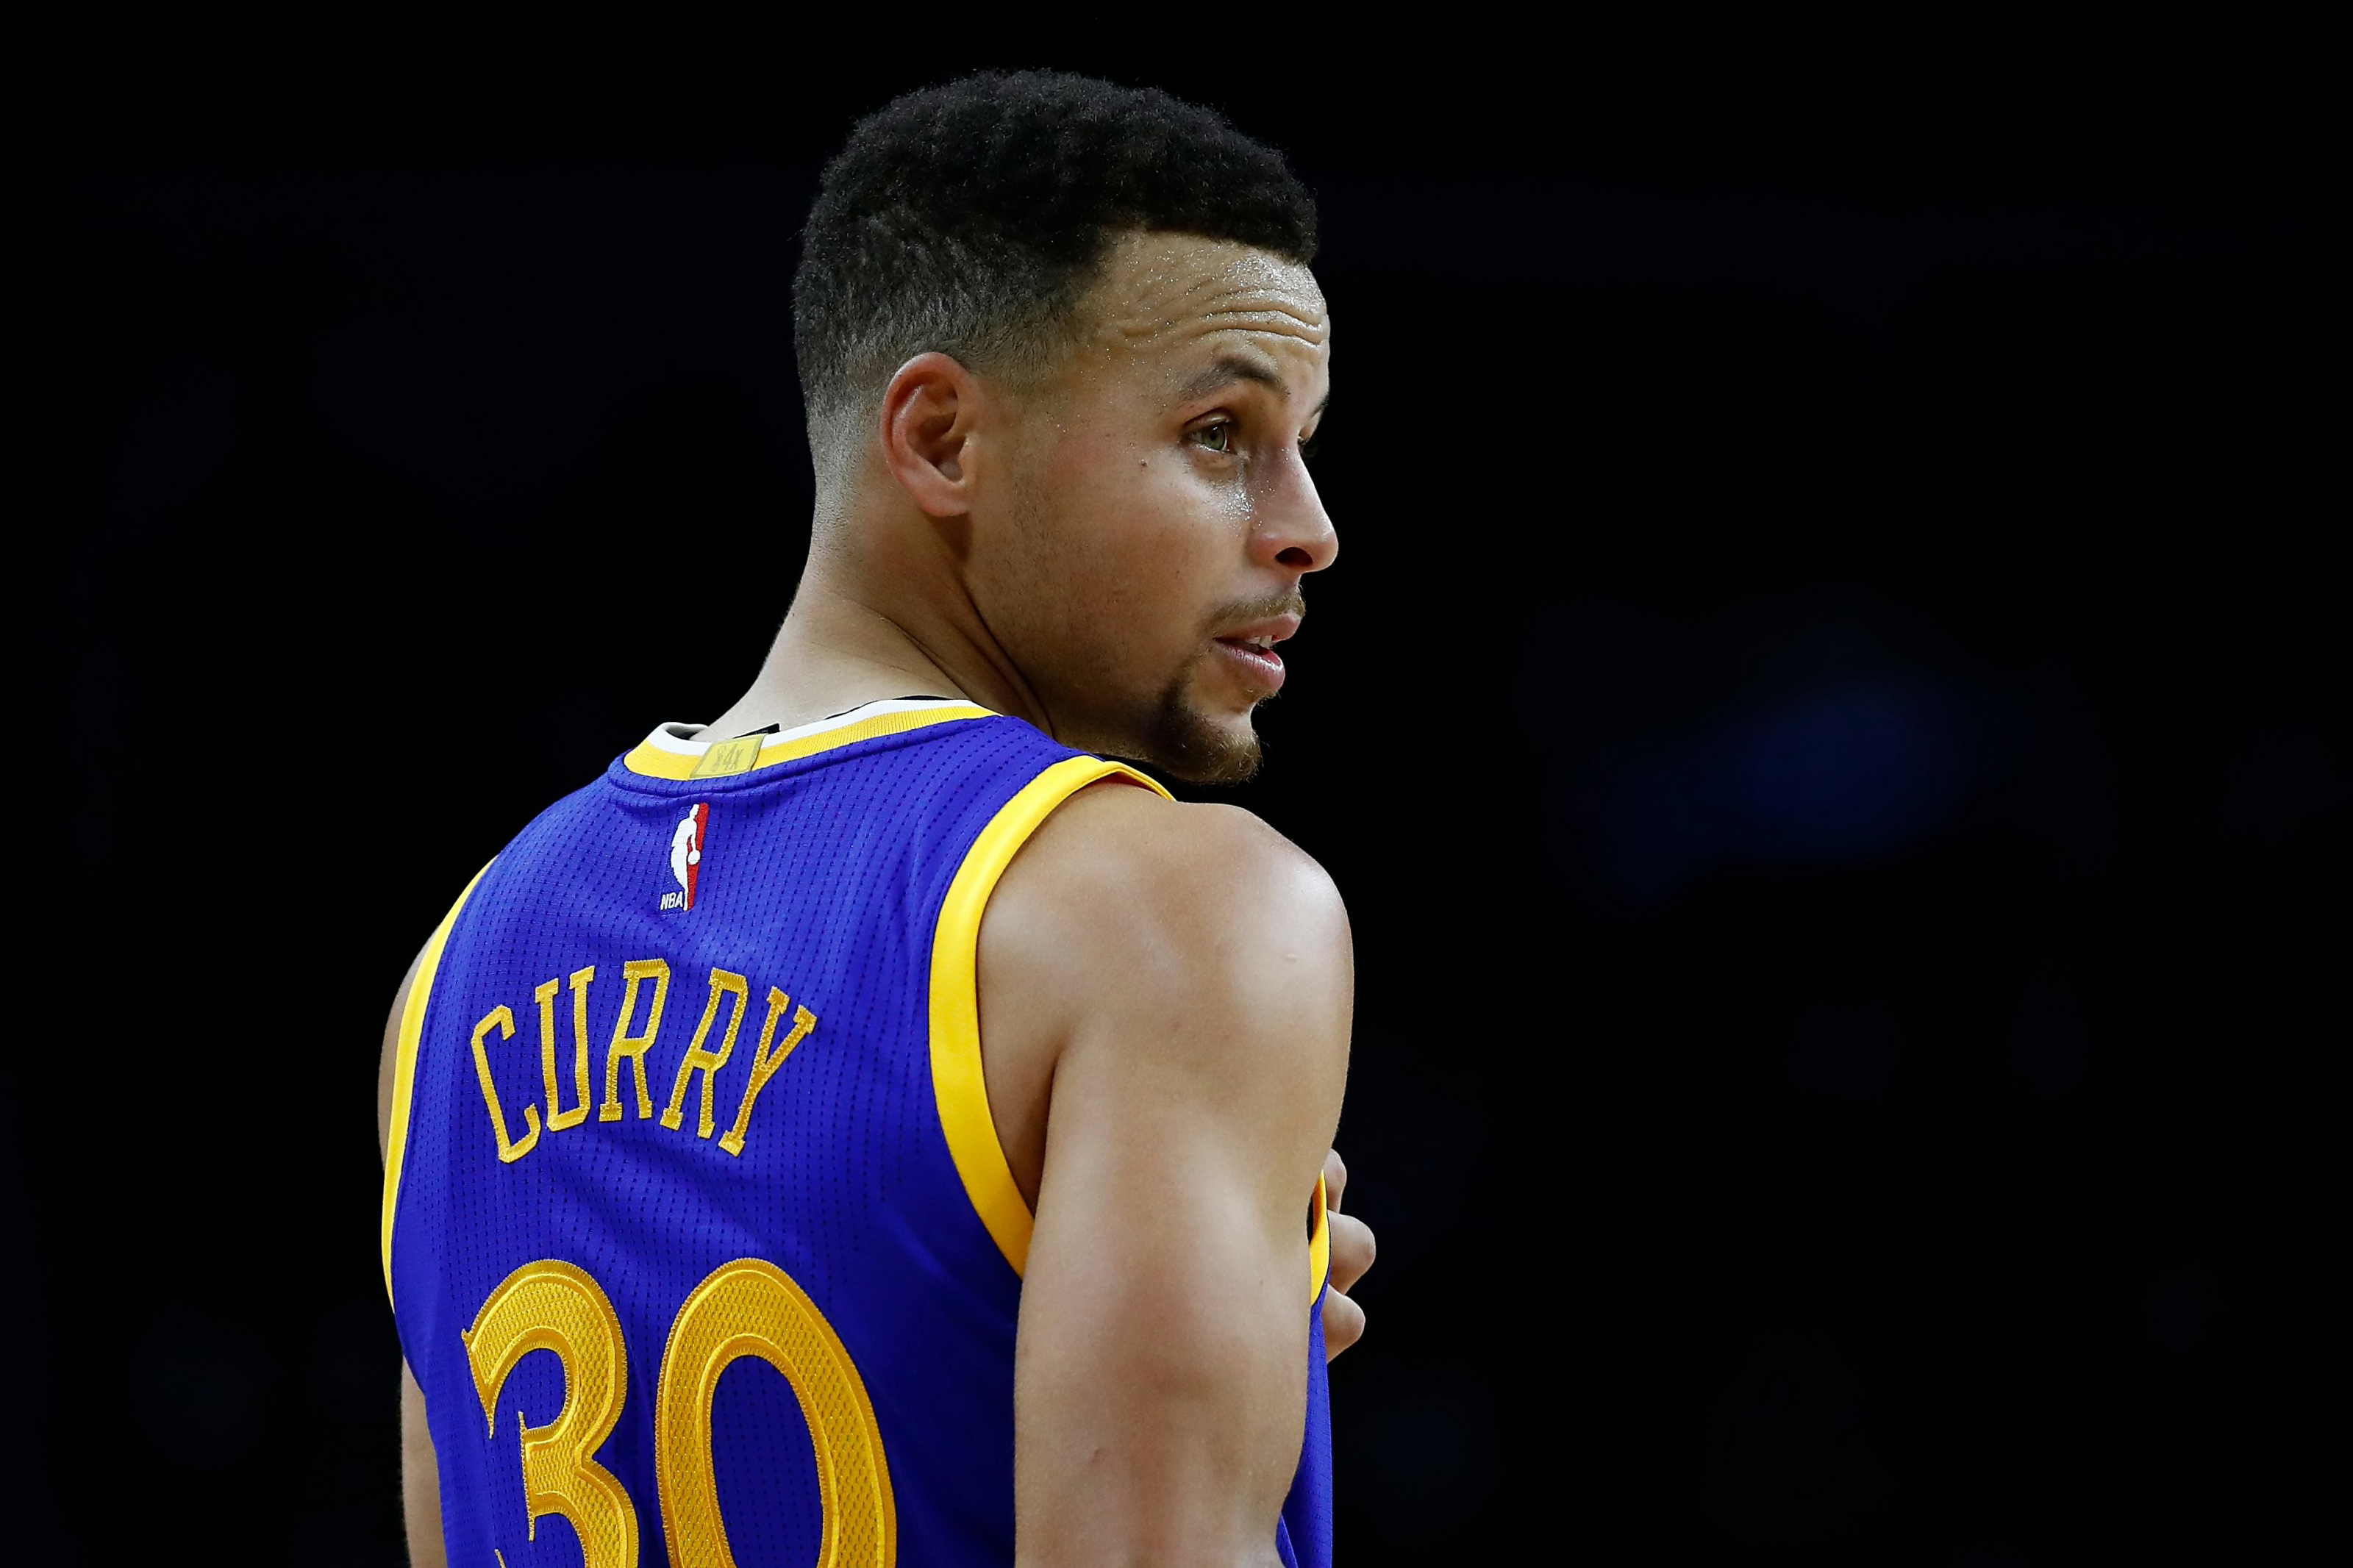 Mezquita desinfectar Extracto Stephen Curry's 2015-16 season is amongst the best ever in NBA history